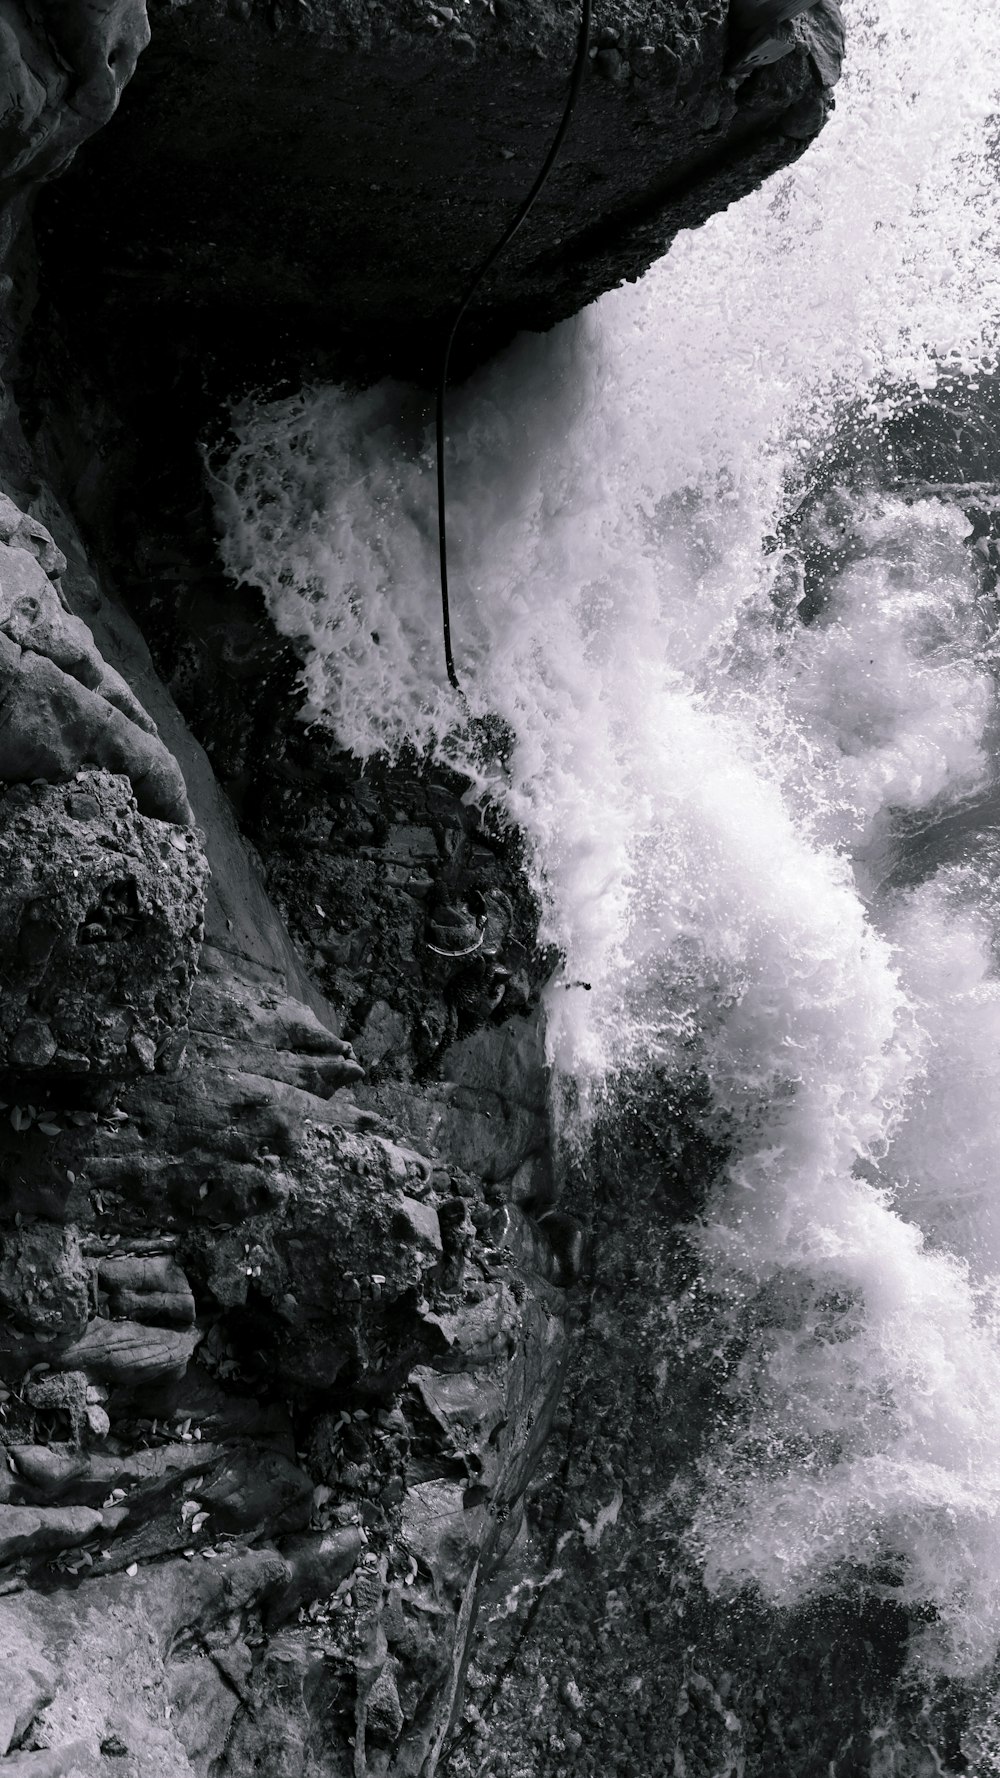 gray scale photo of water falls